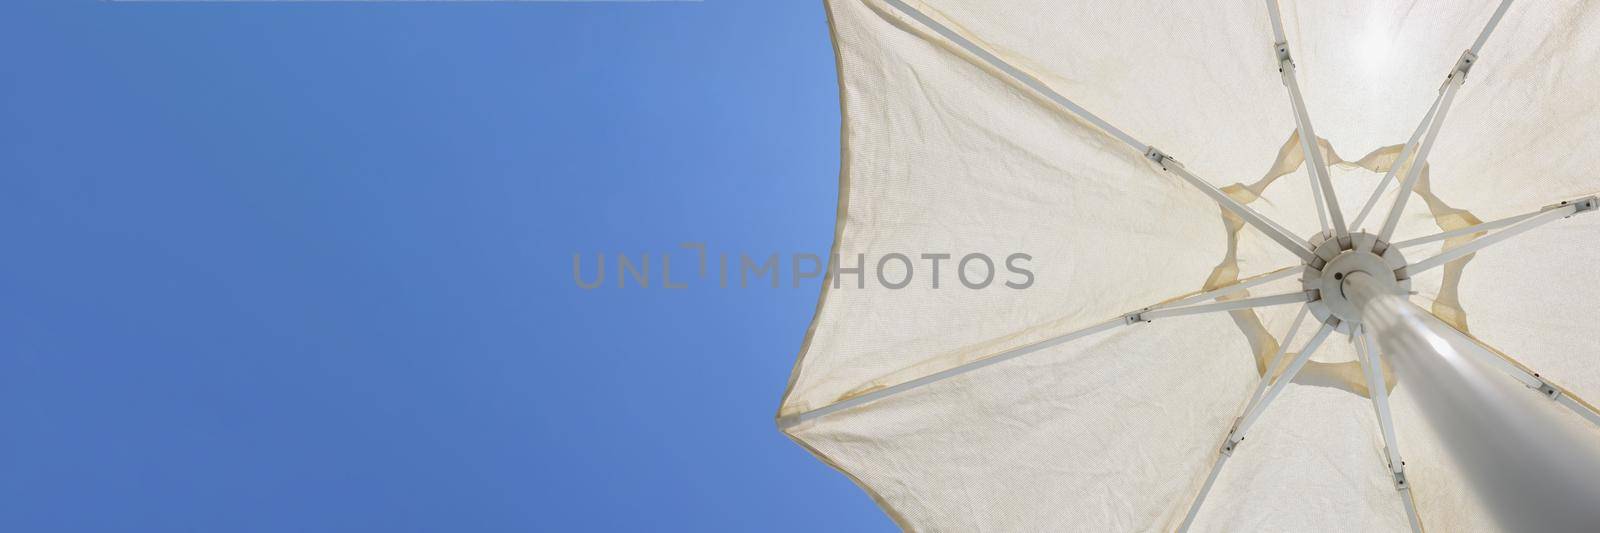 Close-up of white beach parasol, metal stalk and round shaped cover to create shadow from sun. Piece of blue summer sky. Summertime, tourism, holiday, beach equipment concept